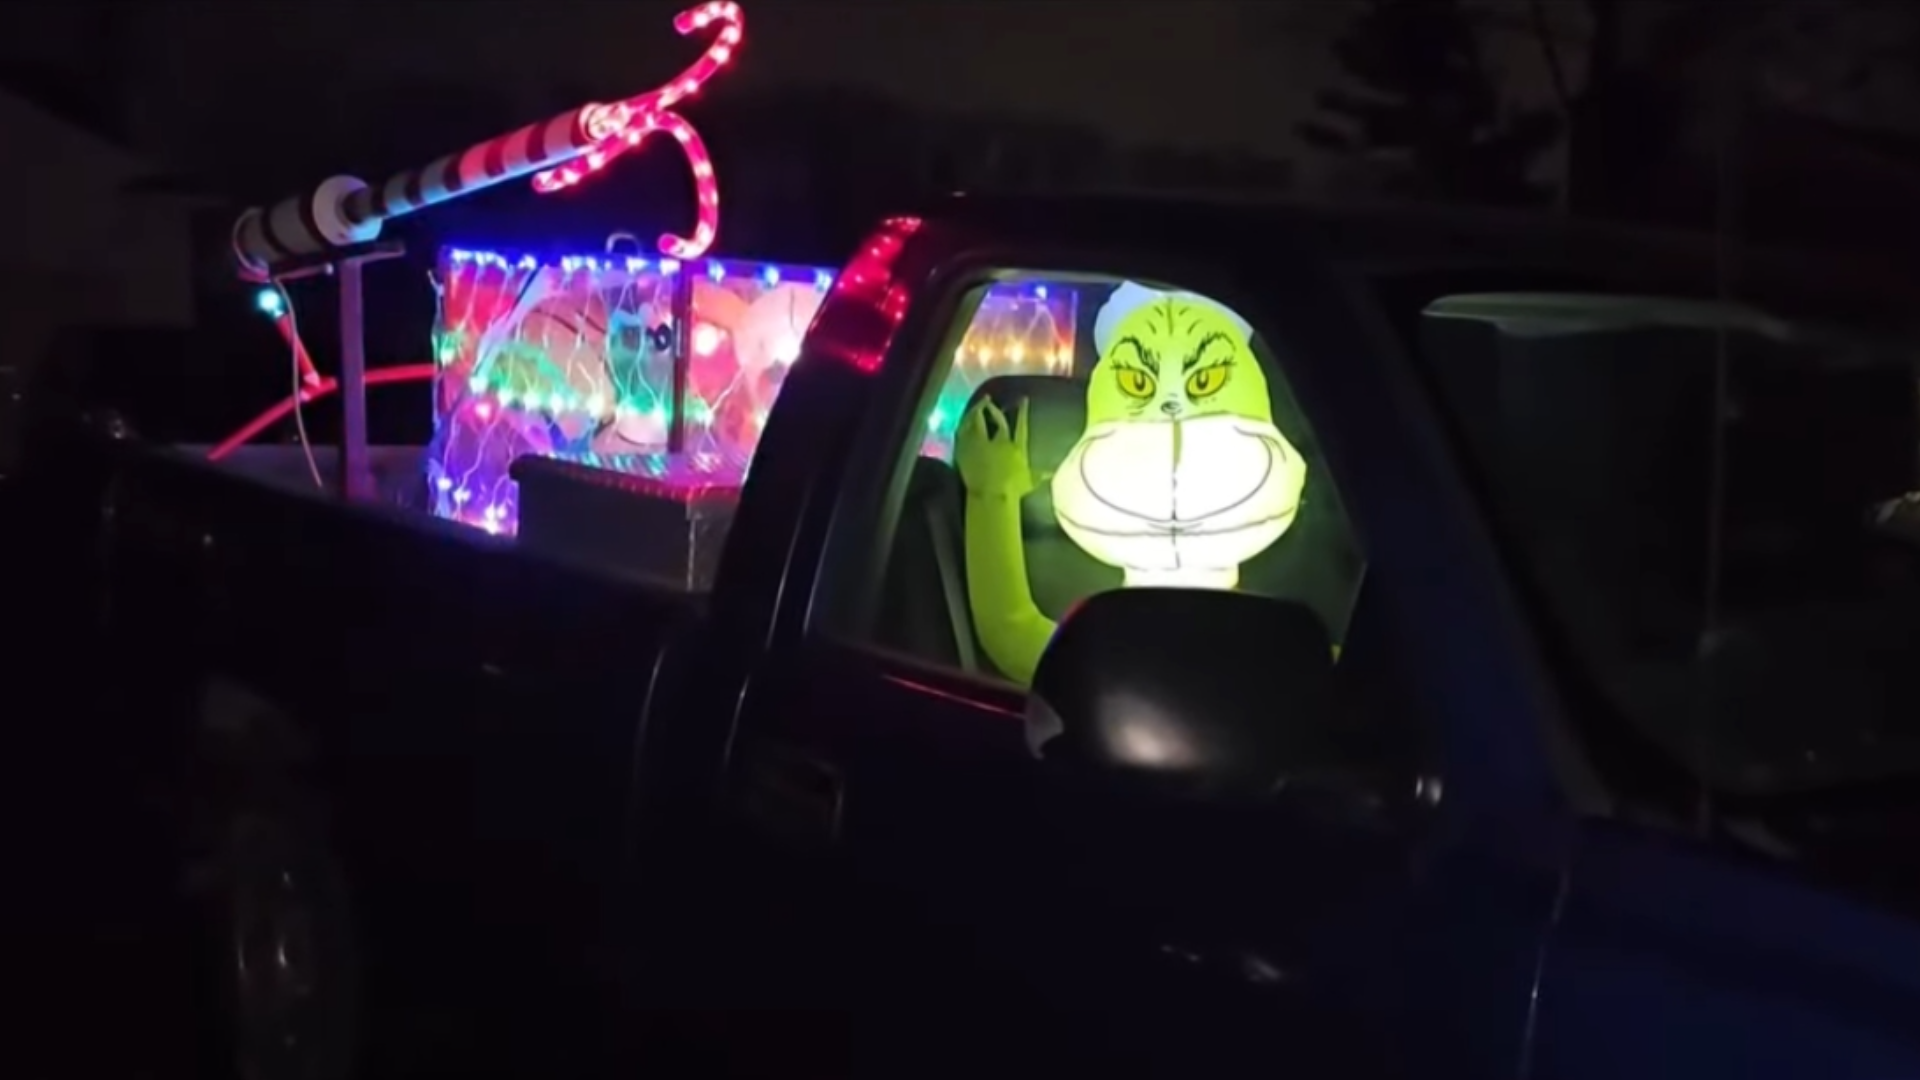 Man decorates truck with 'The Grinch' theme for young kids